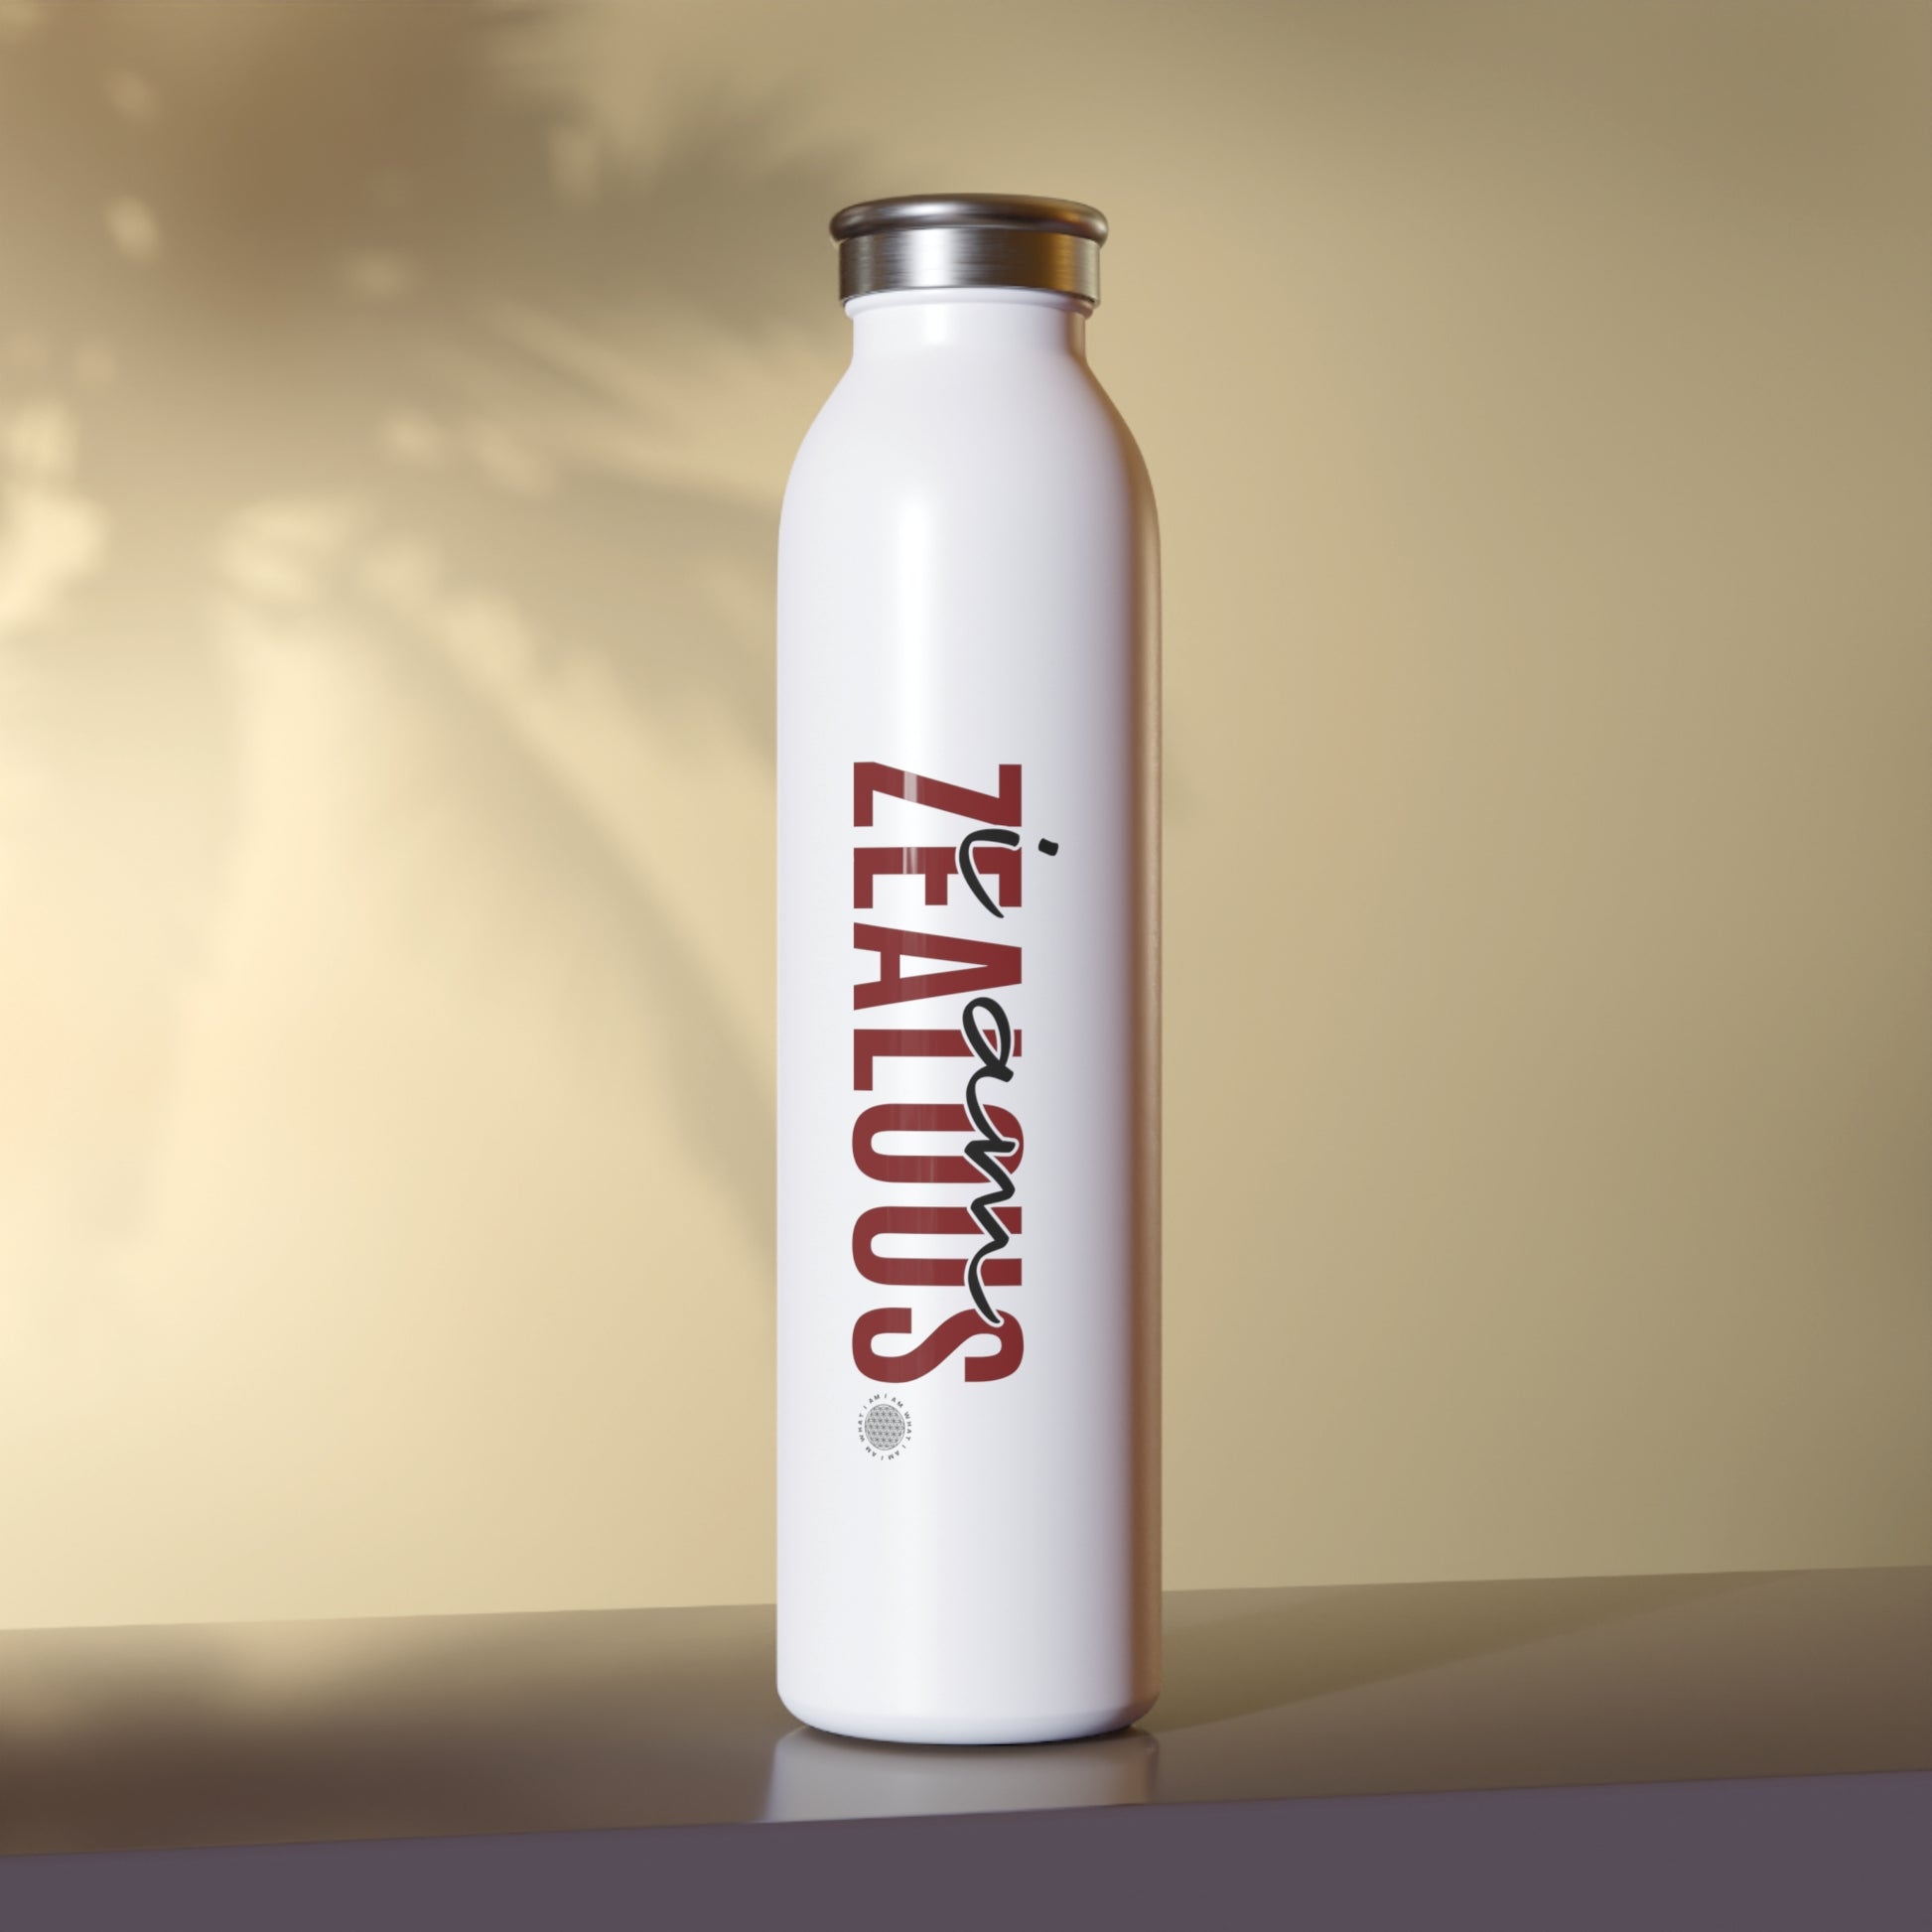 Introducing the I Am Zealous Slim Water Bottle from I Am What I Am Shop. This stylish and slim water bottle is perfect for any occasion.